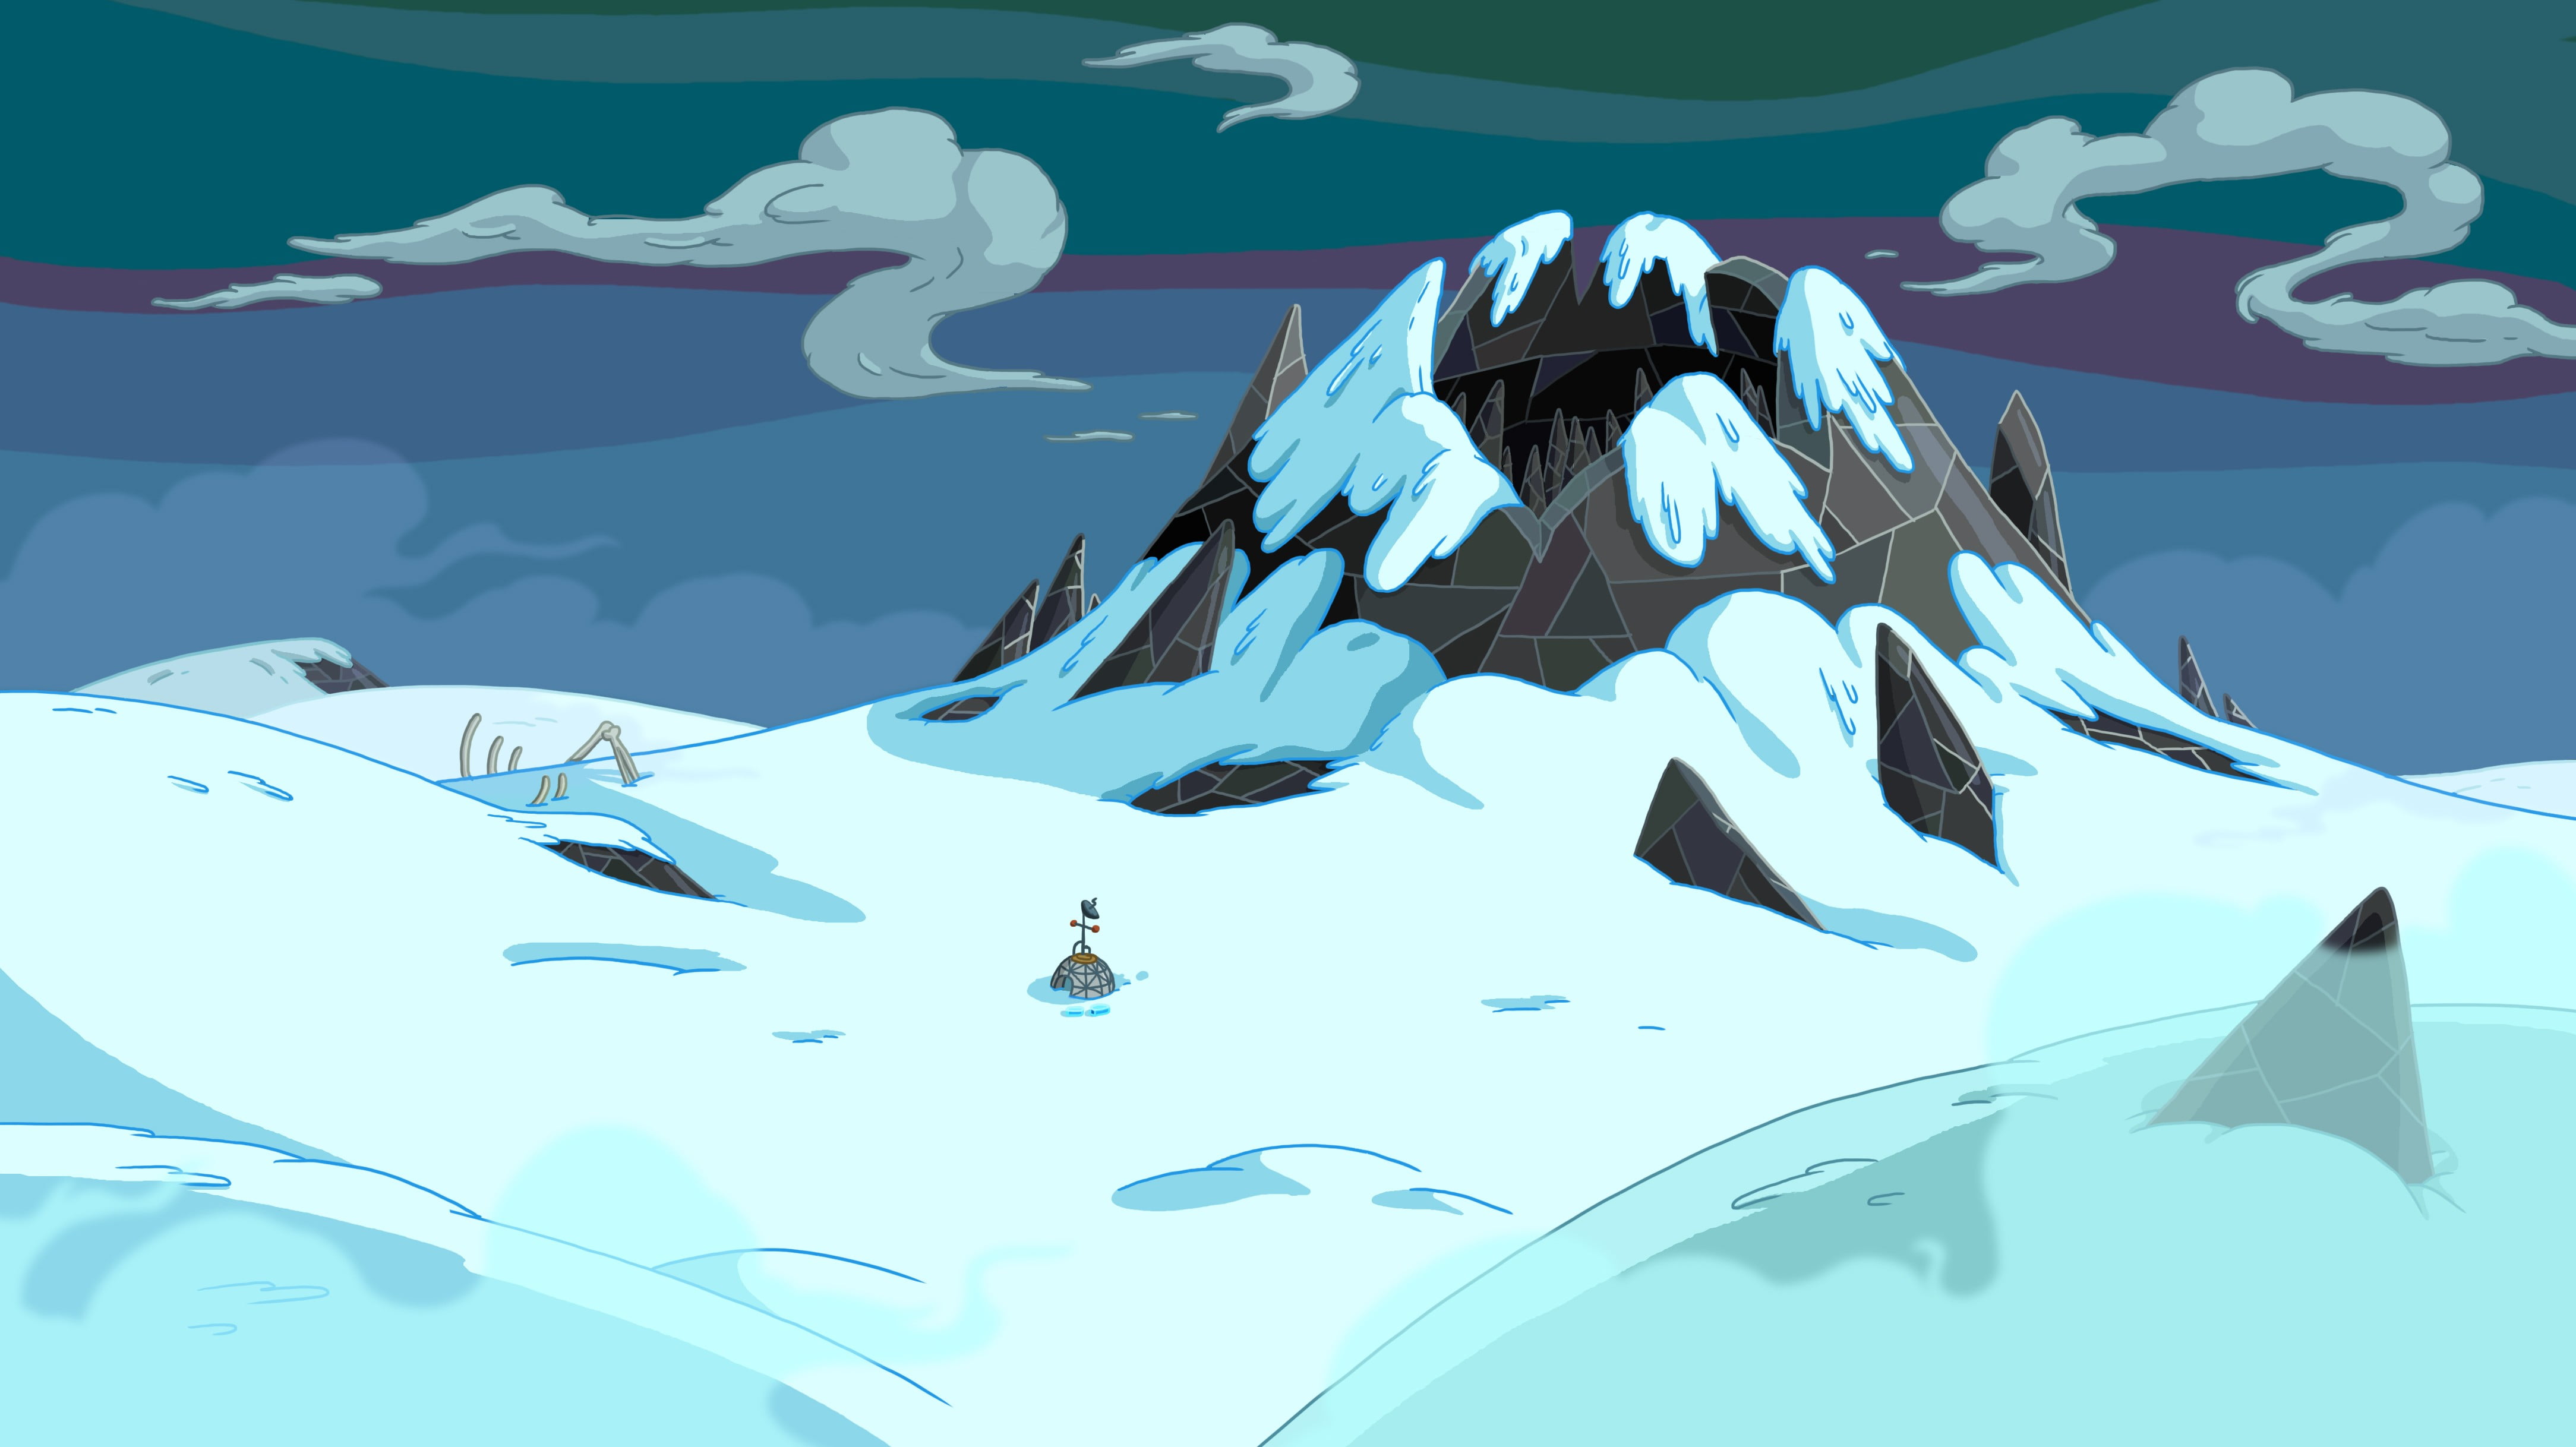 mountain covered by snow cartoon illustration, Adventure Time, cartoon